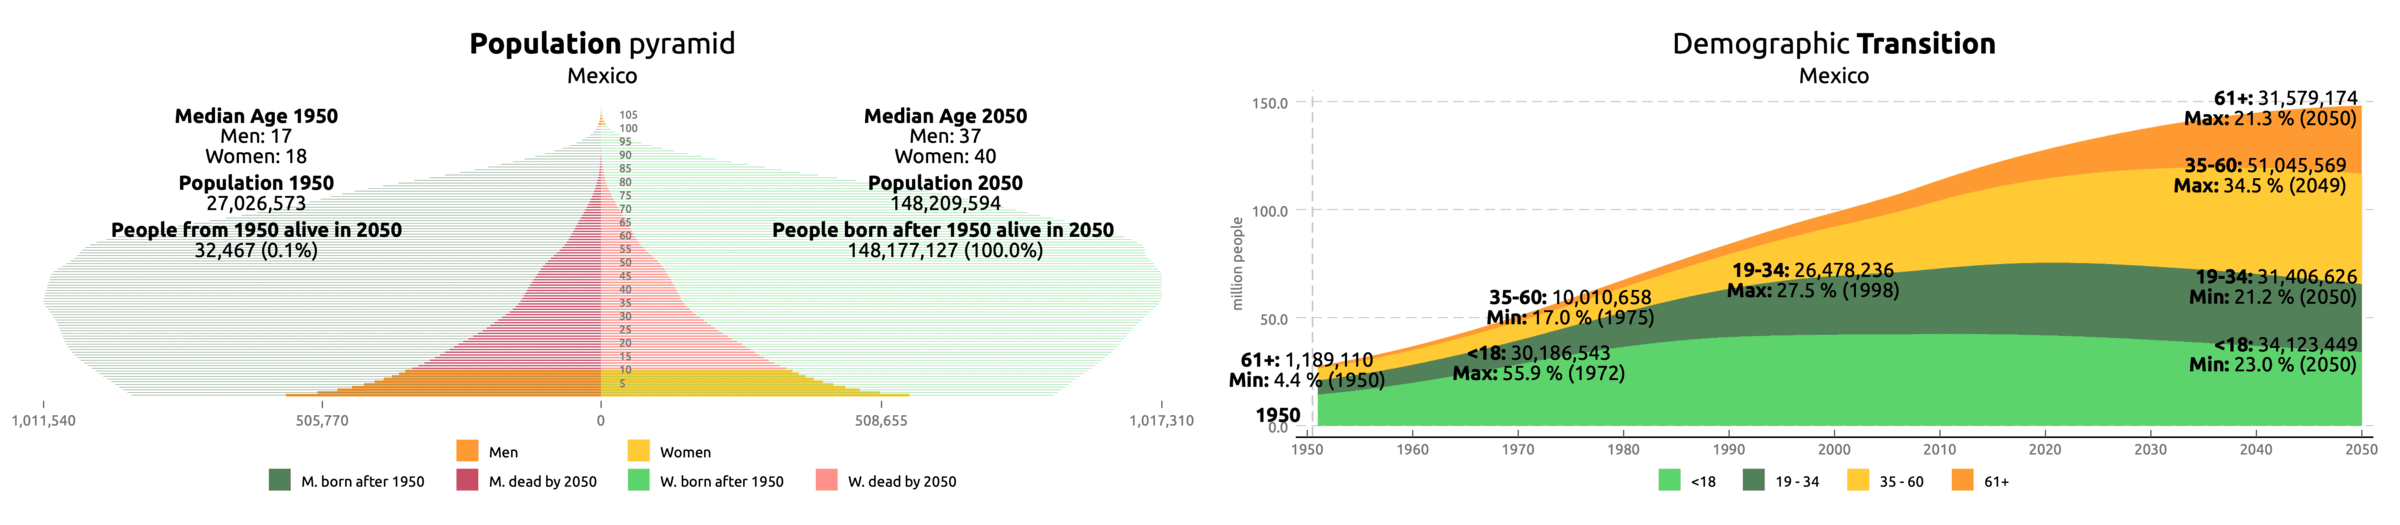 Demographic Transition in Mexico